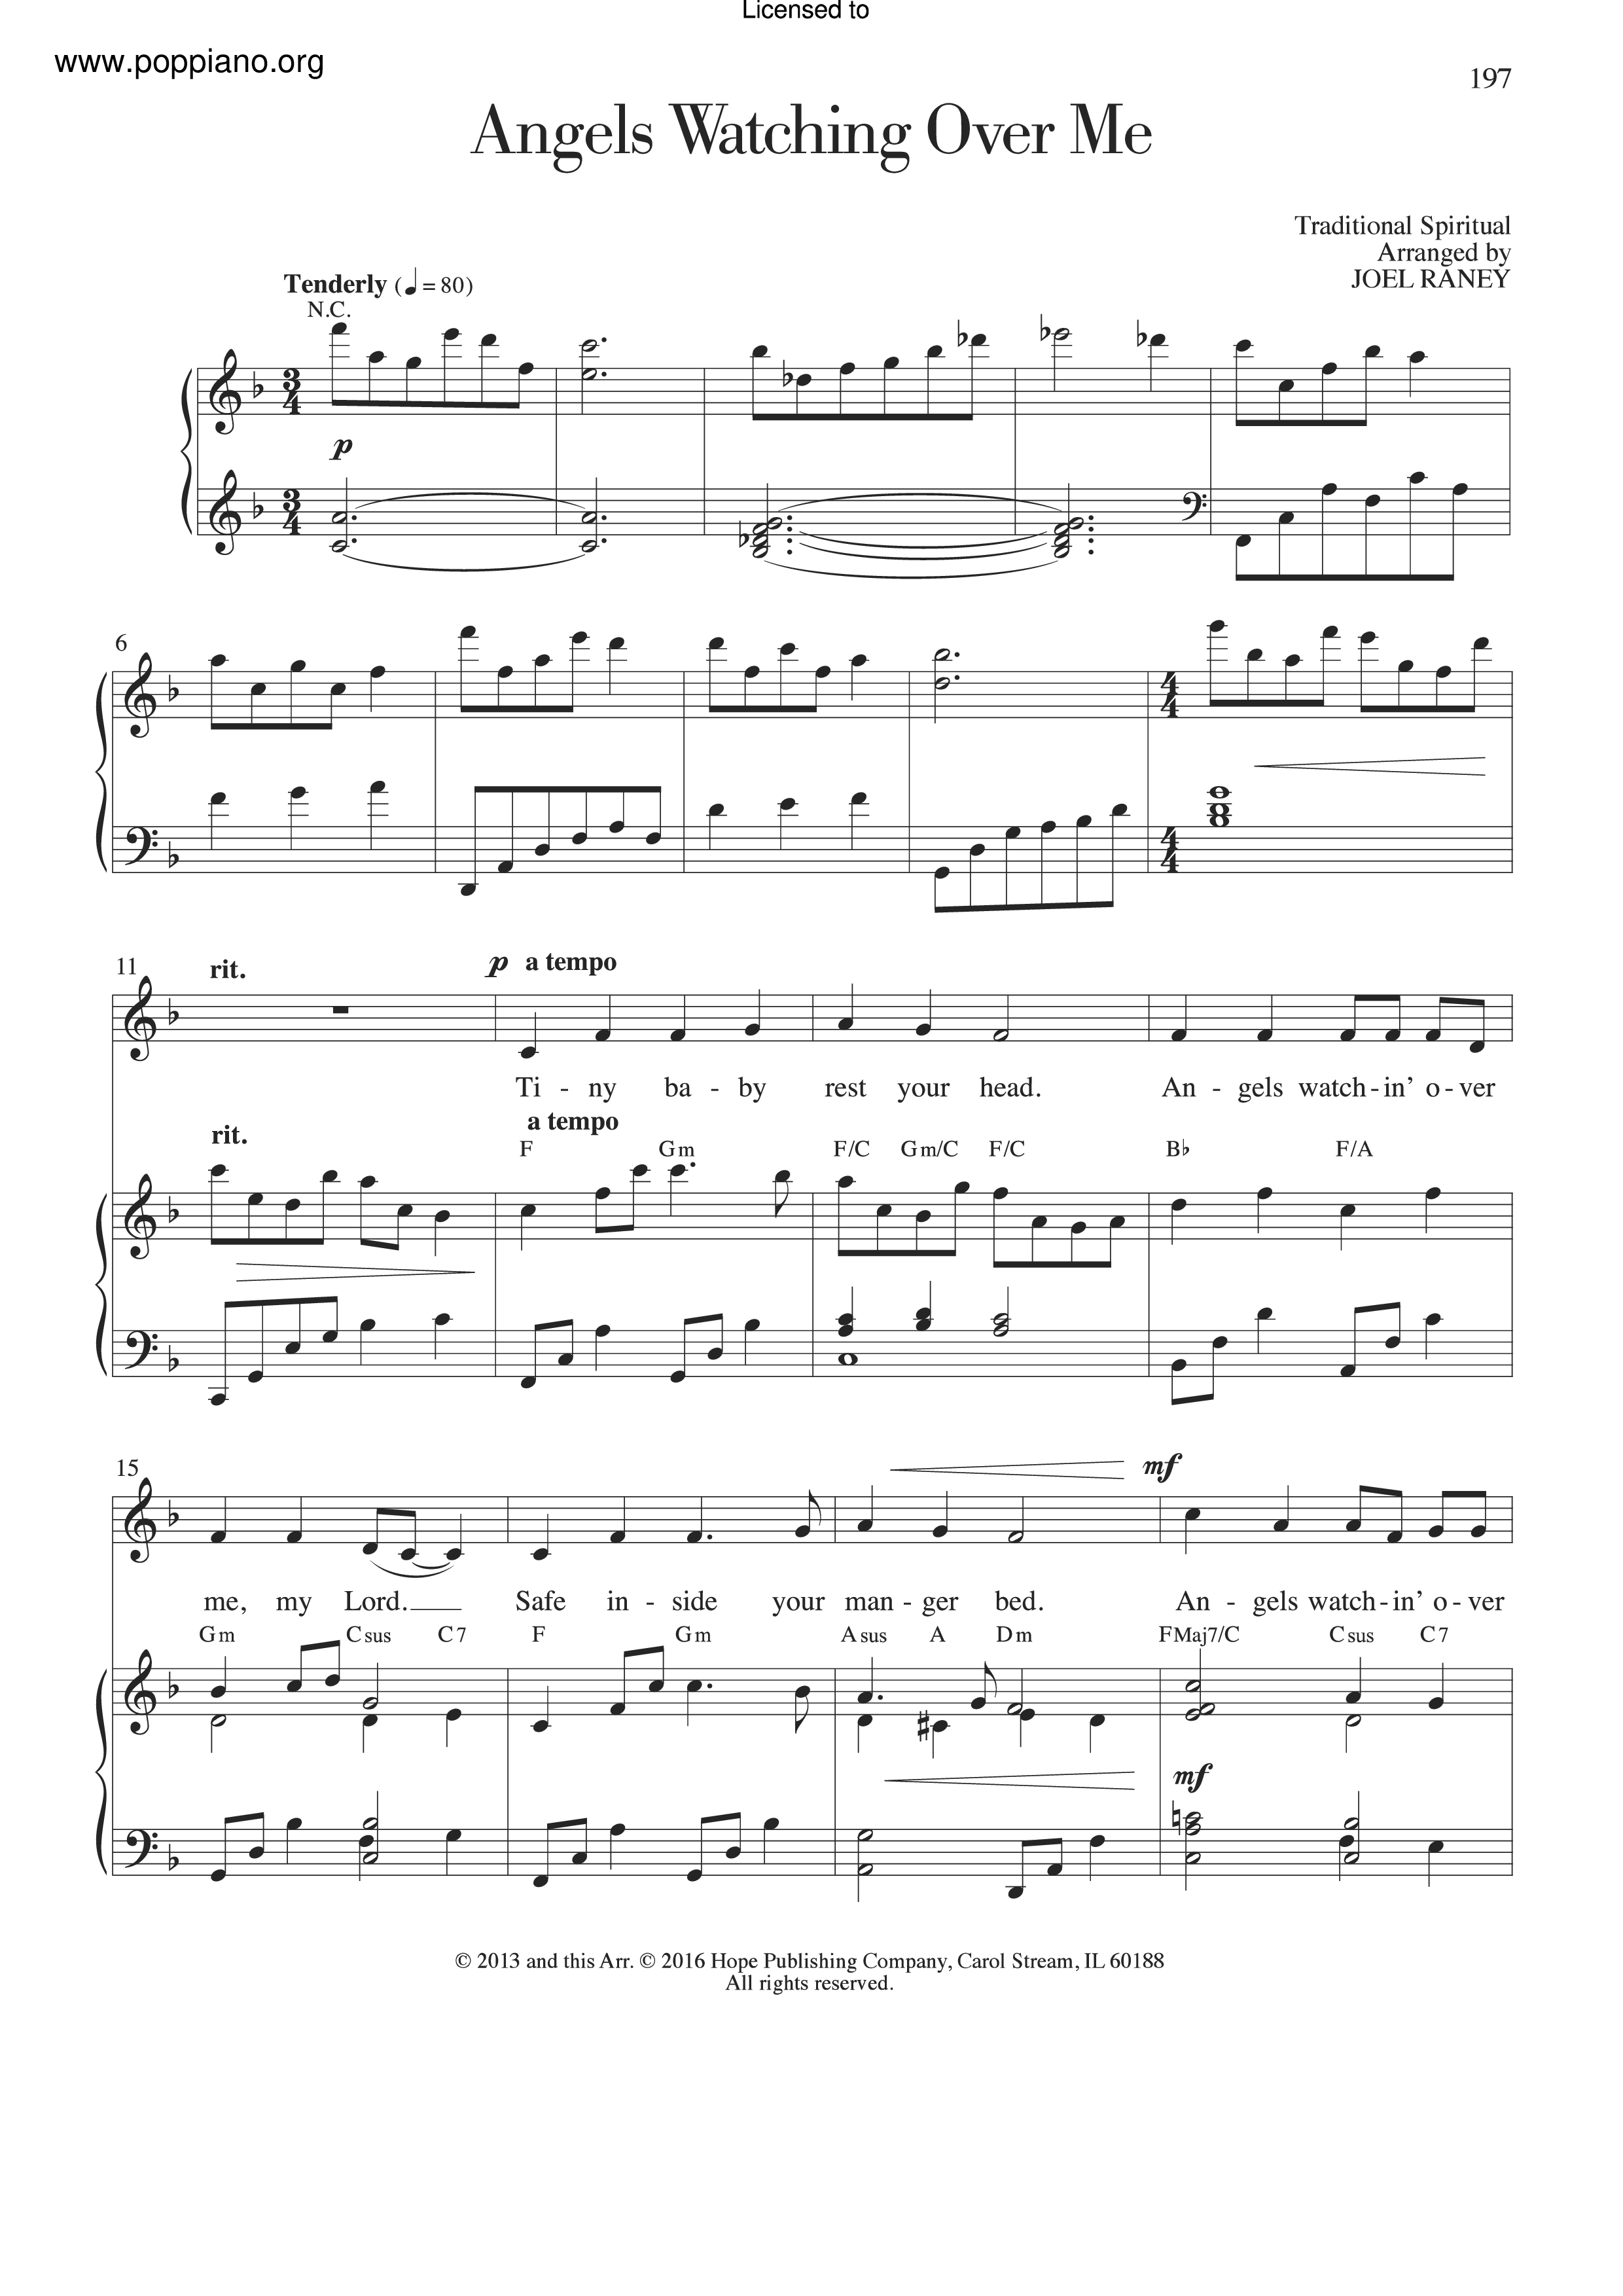 Amy Grant Angels Watching Over Me Sheet Music Pdf Free Score Download ★